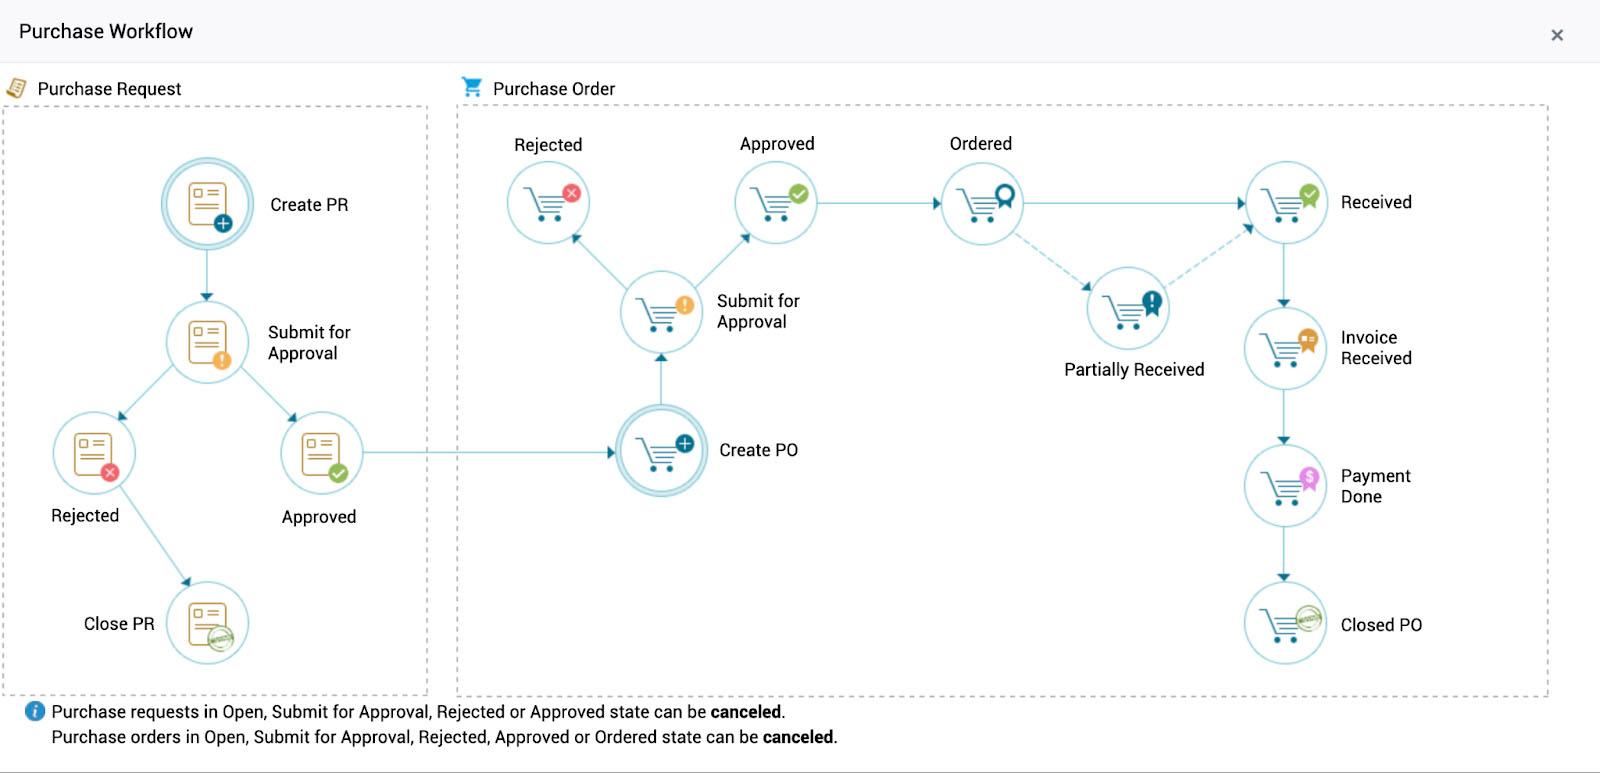 Image showing the purchase order workflow in AssetExplorer.